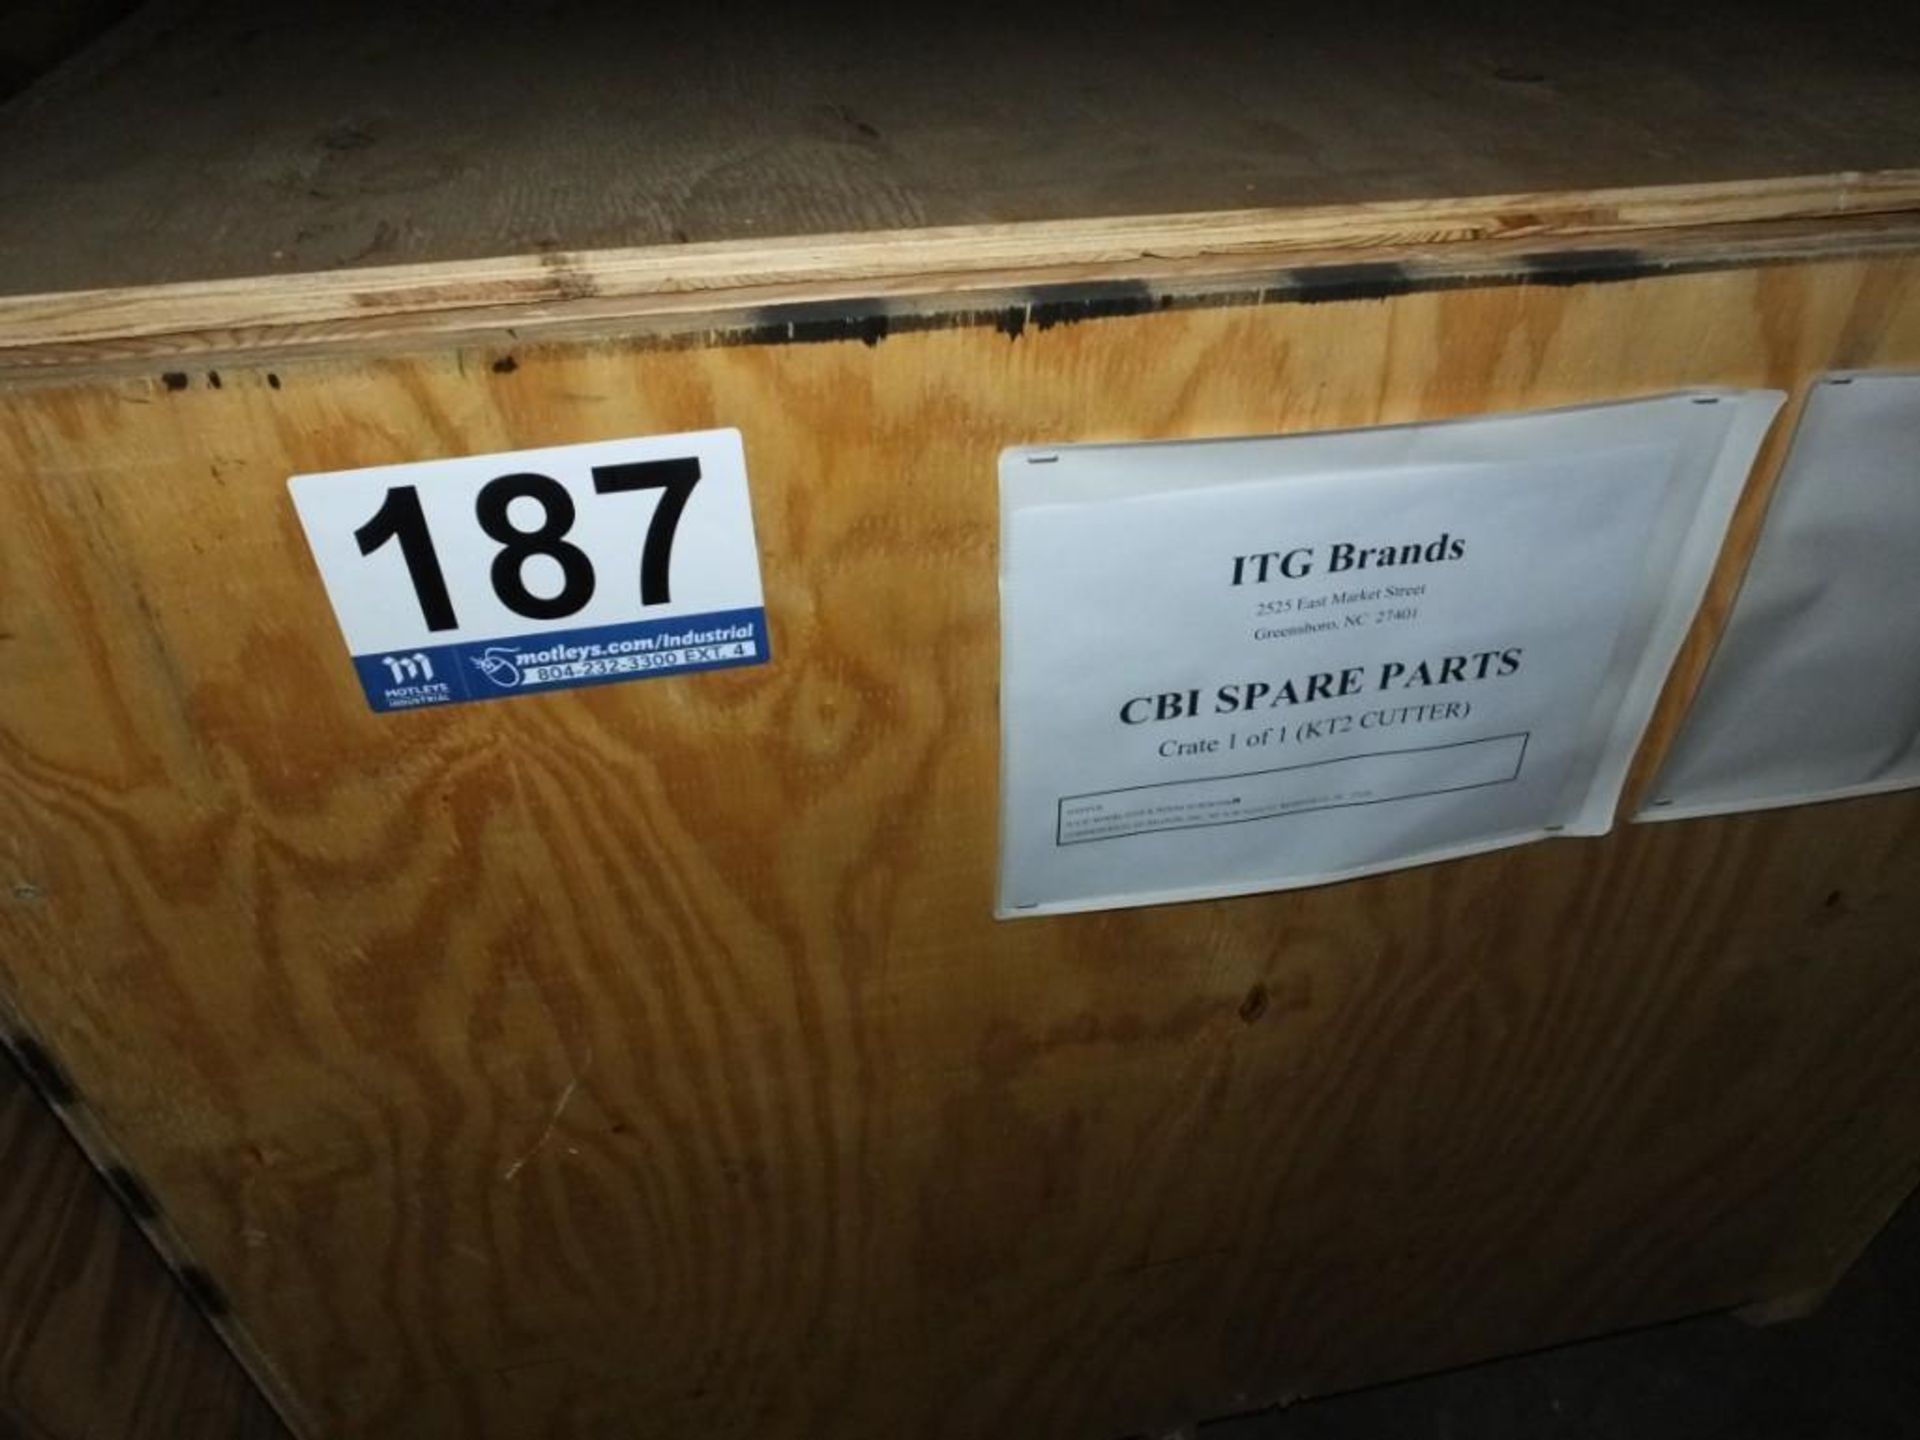 Hauni KT2 Spare Parts Crate with Approx. 150 Line Items and Over 500 Parts - Image 2 of 3